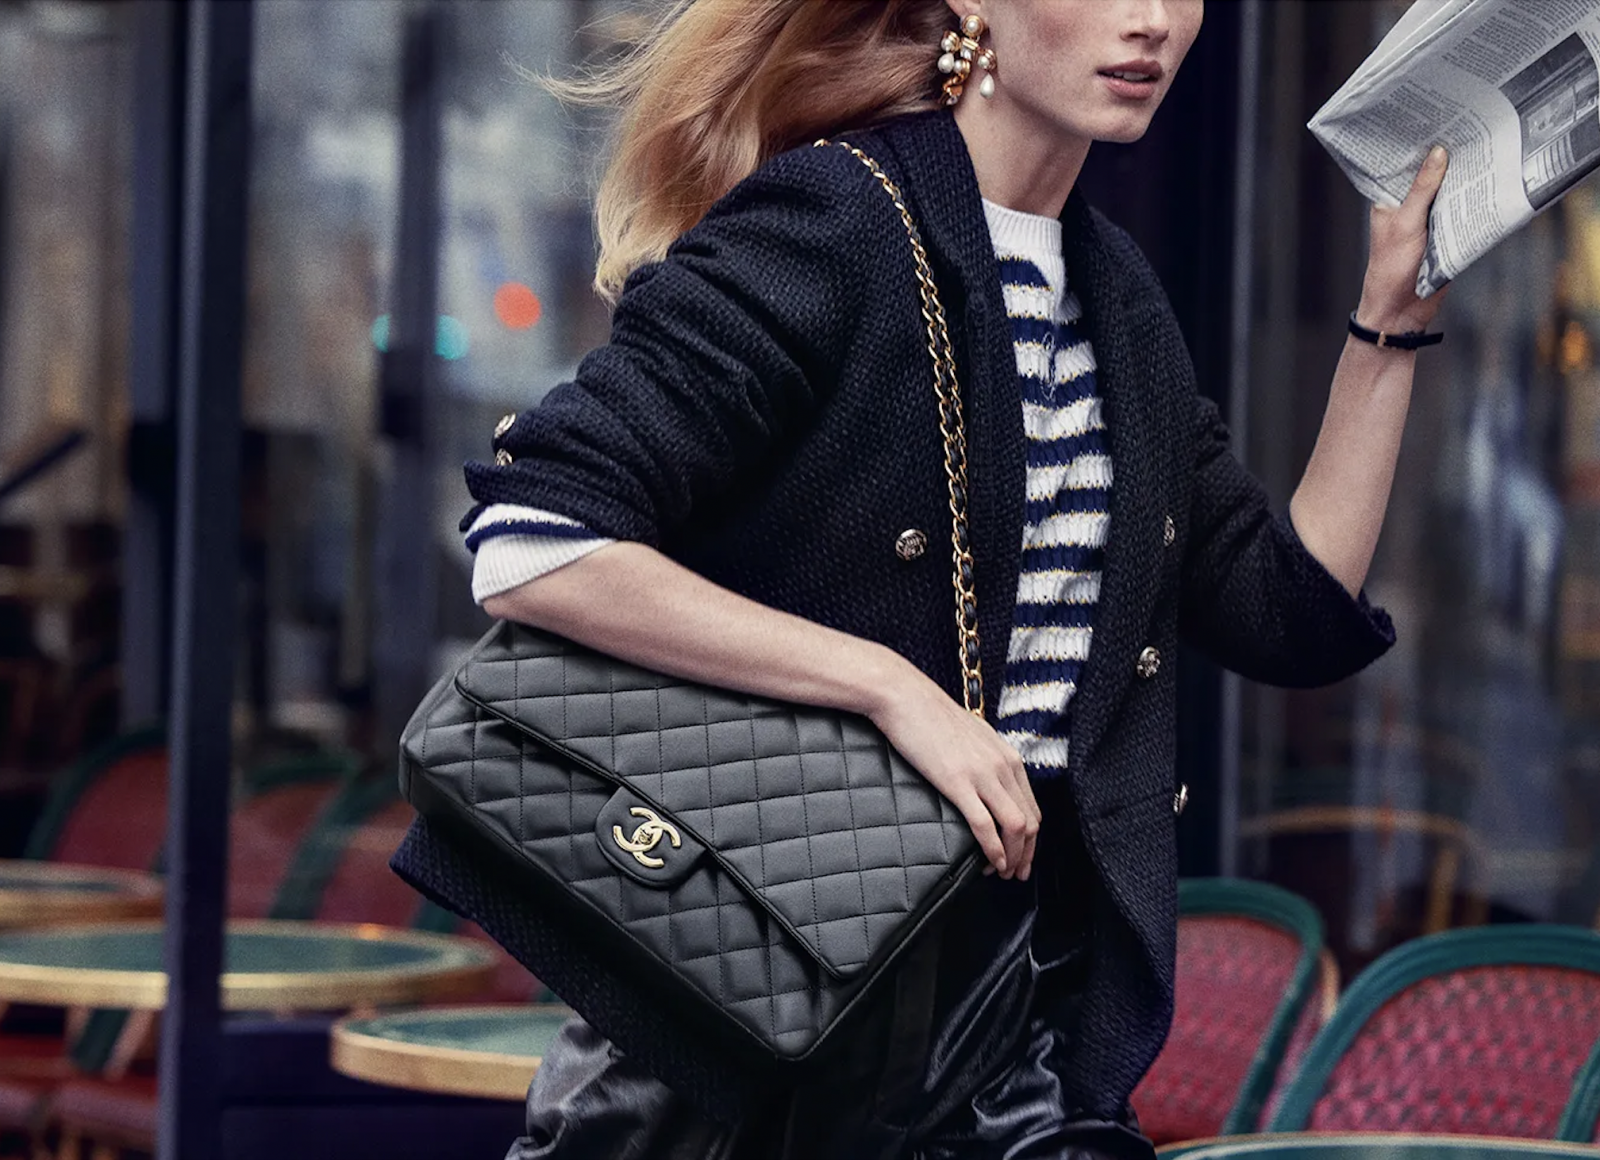 Chanel Boosts Prices Again Amid Push Increased Exclusivity and from Resale - The Law